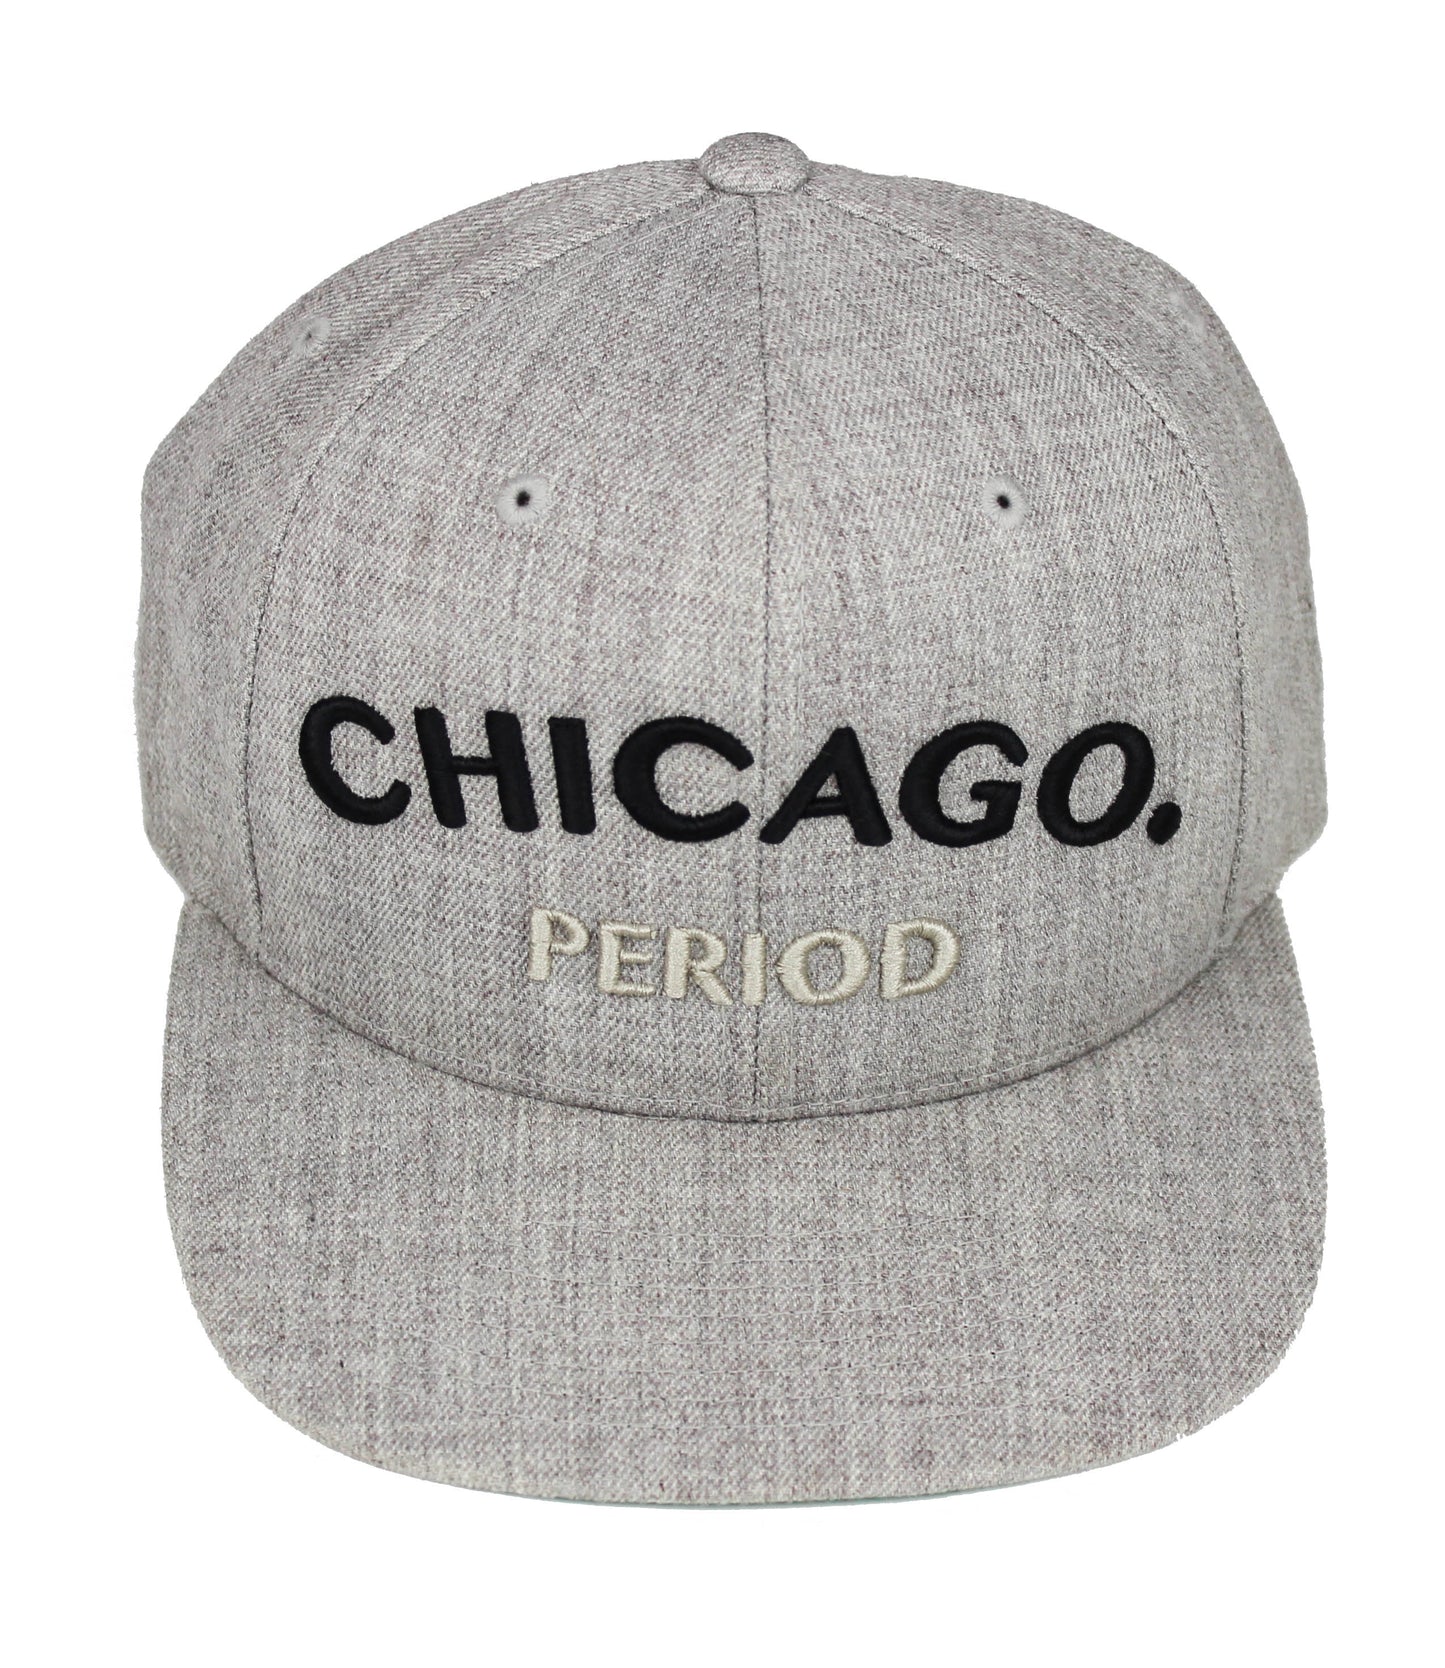 Chicago Period Snapback (Cement)